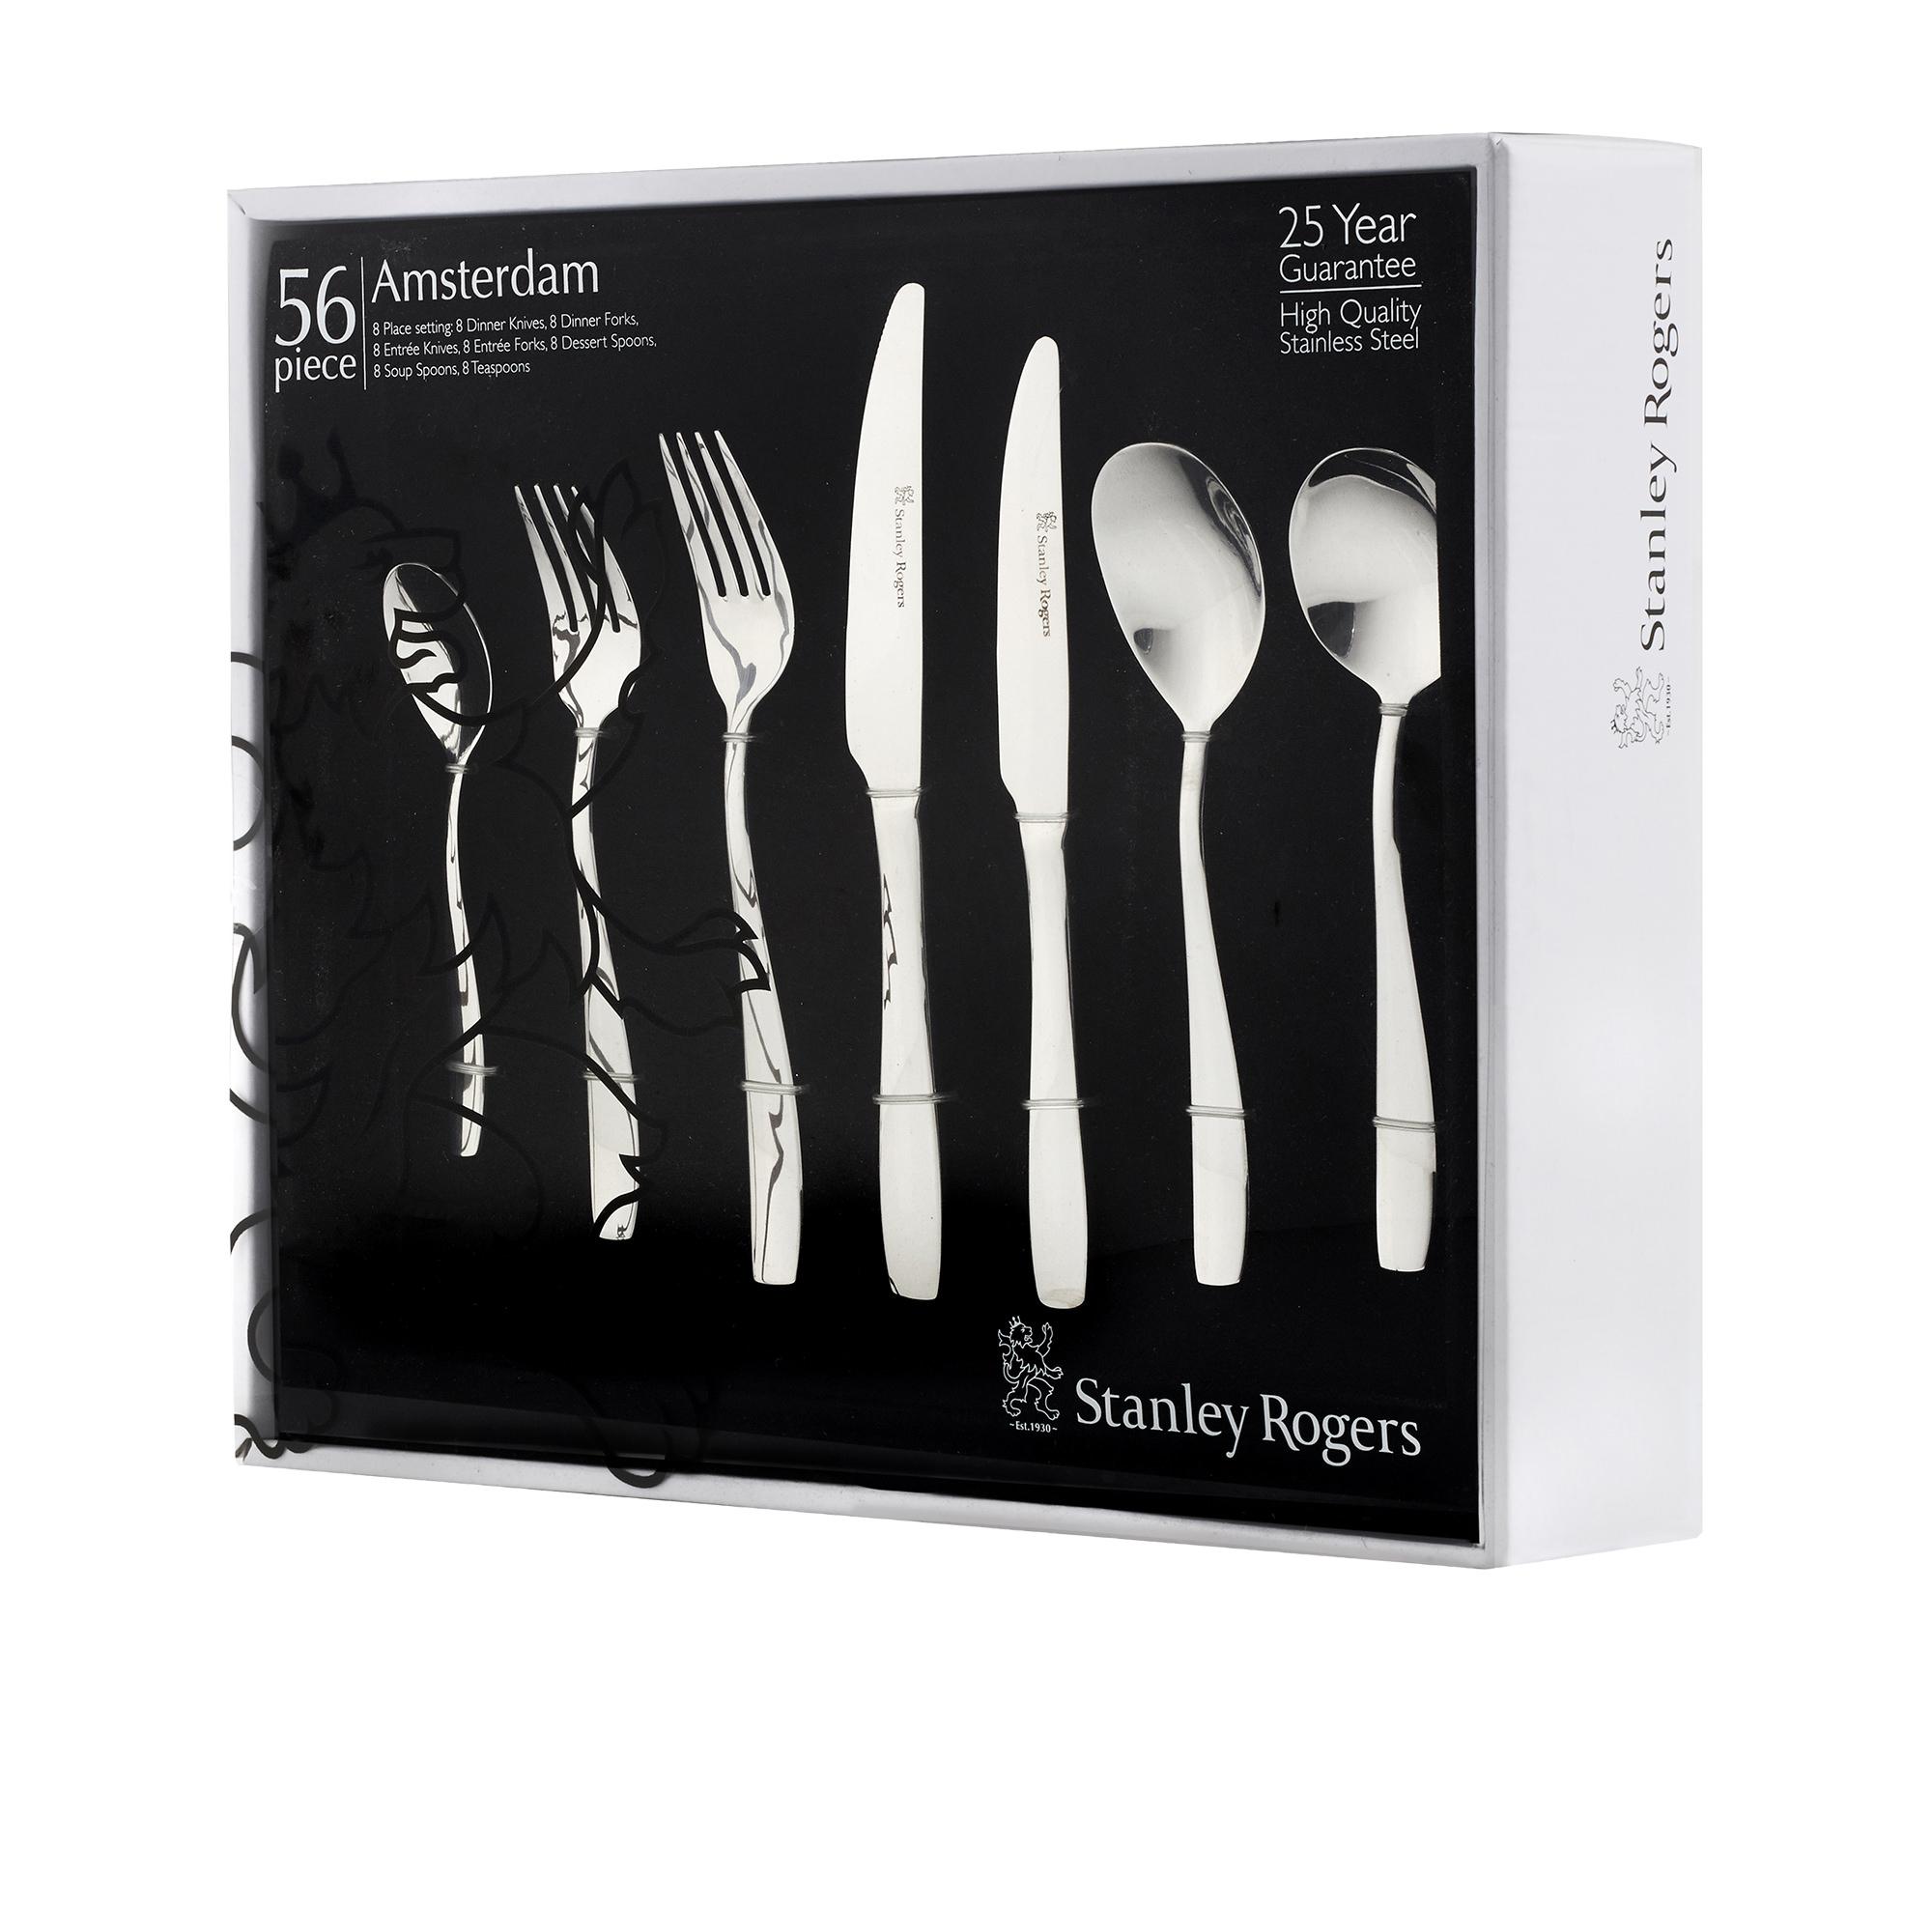 Stanley Rogers Amsterdam Cutlery Set 56pc Image 4